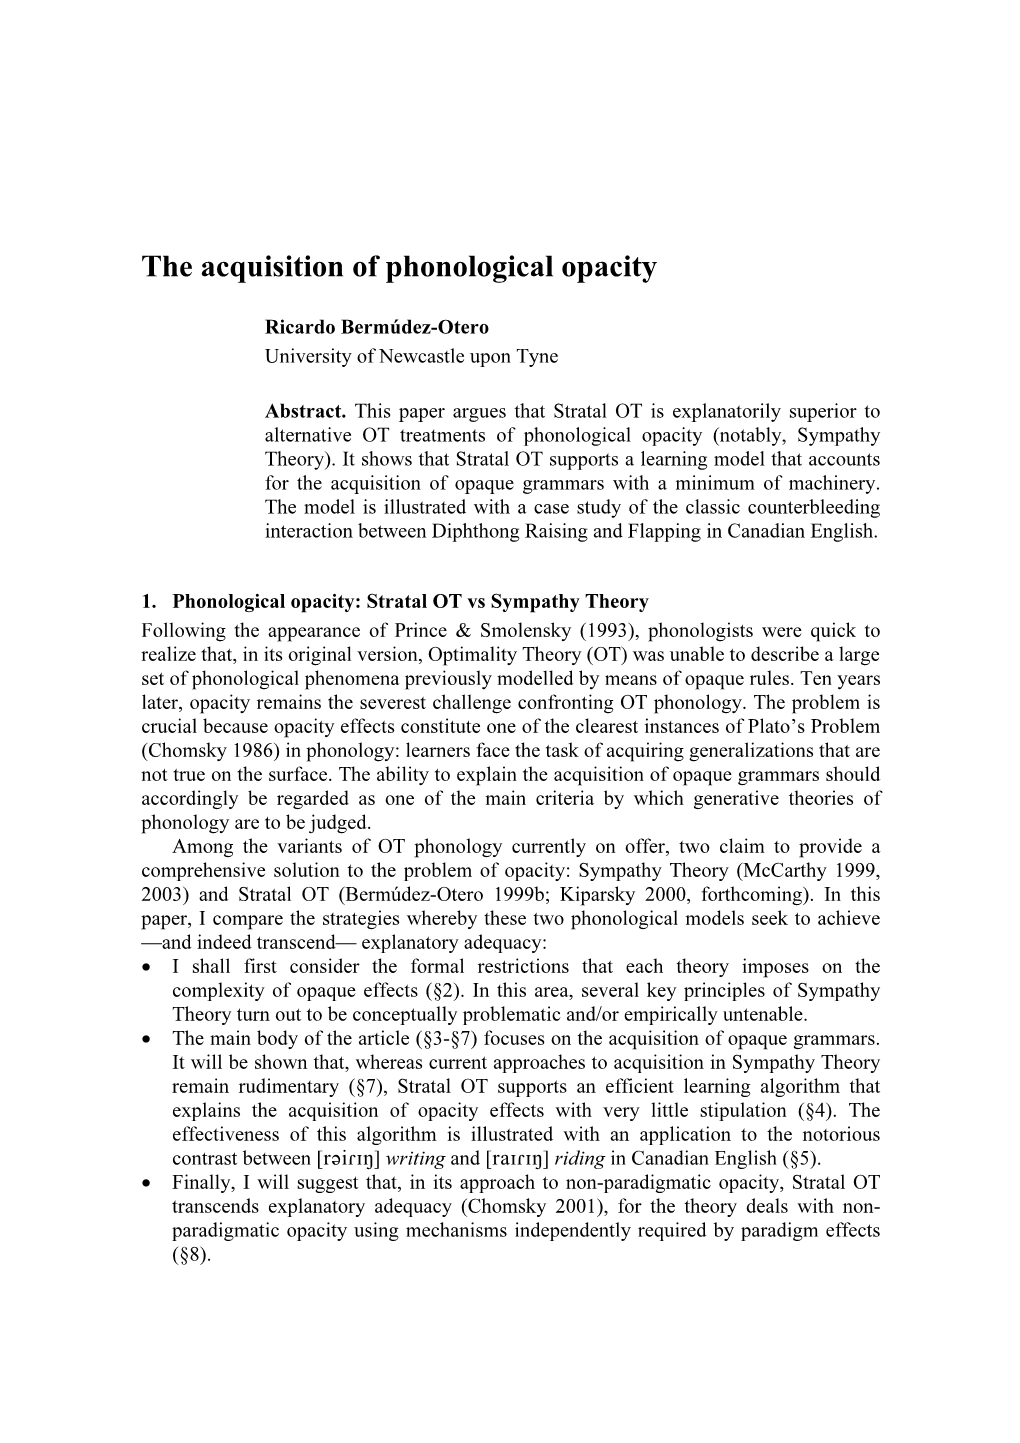 The Acquisition of Phonological Opacity